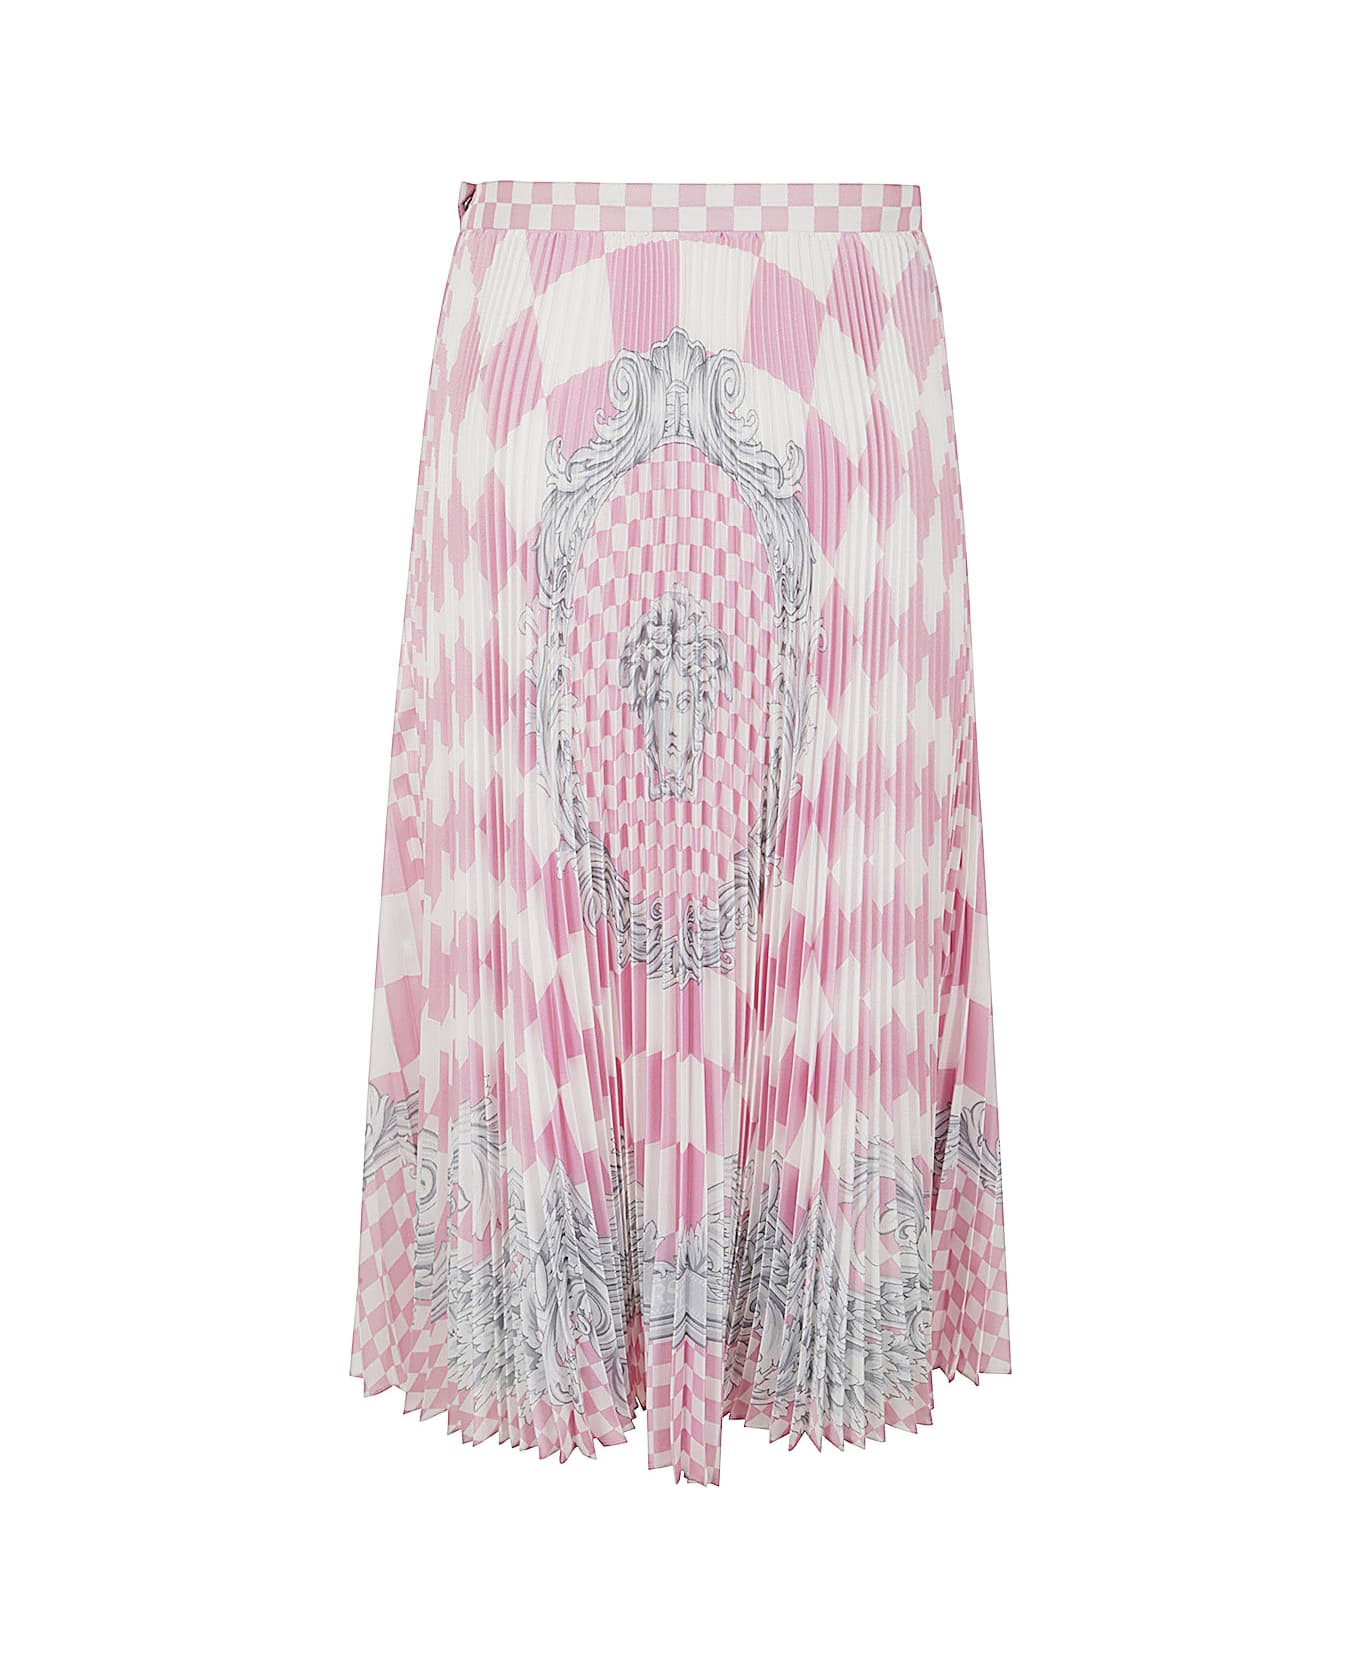 Versace Baroque Silver Printed Skirt - Pastel Pink White Silver スカート